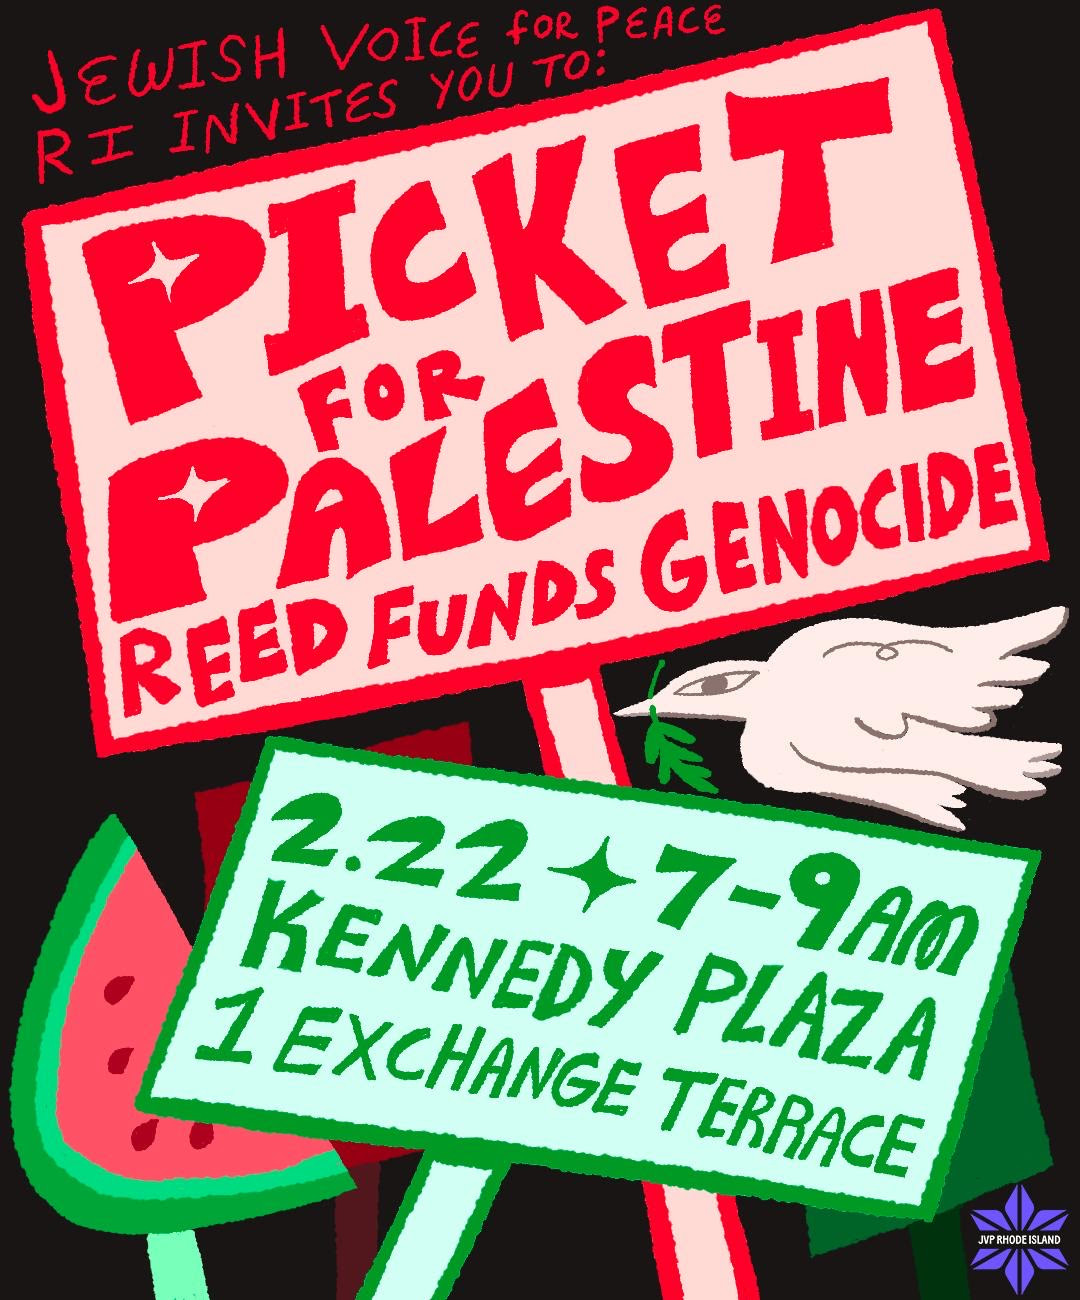 illustration of protests signs; test: Jewish Voice for Peace RI Invites you to: Picket for Palestine, Reed Funds Genocide